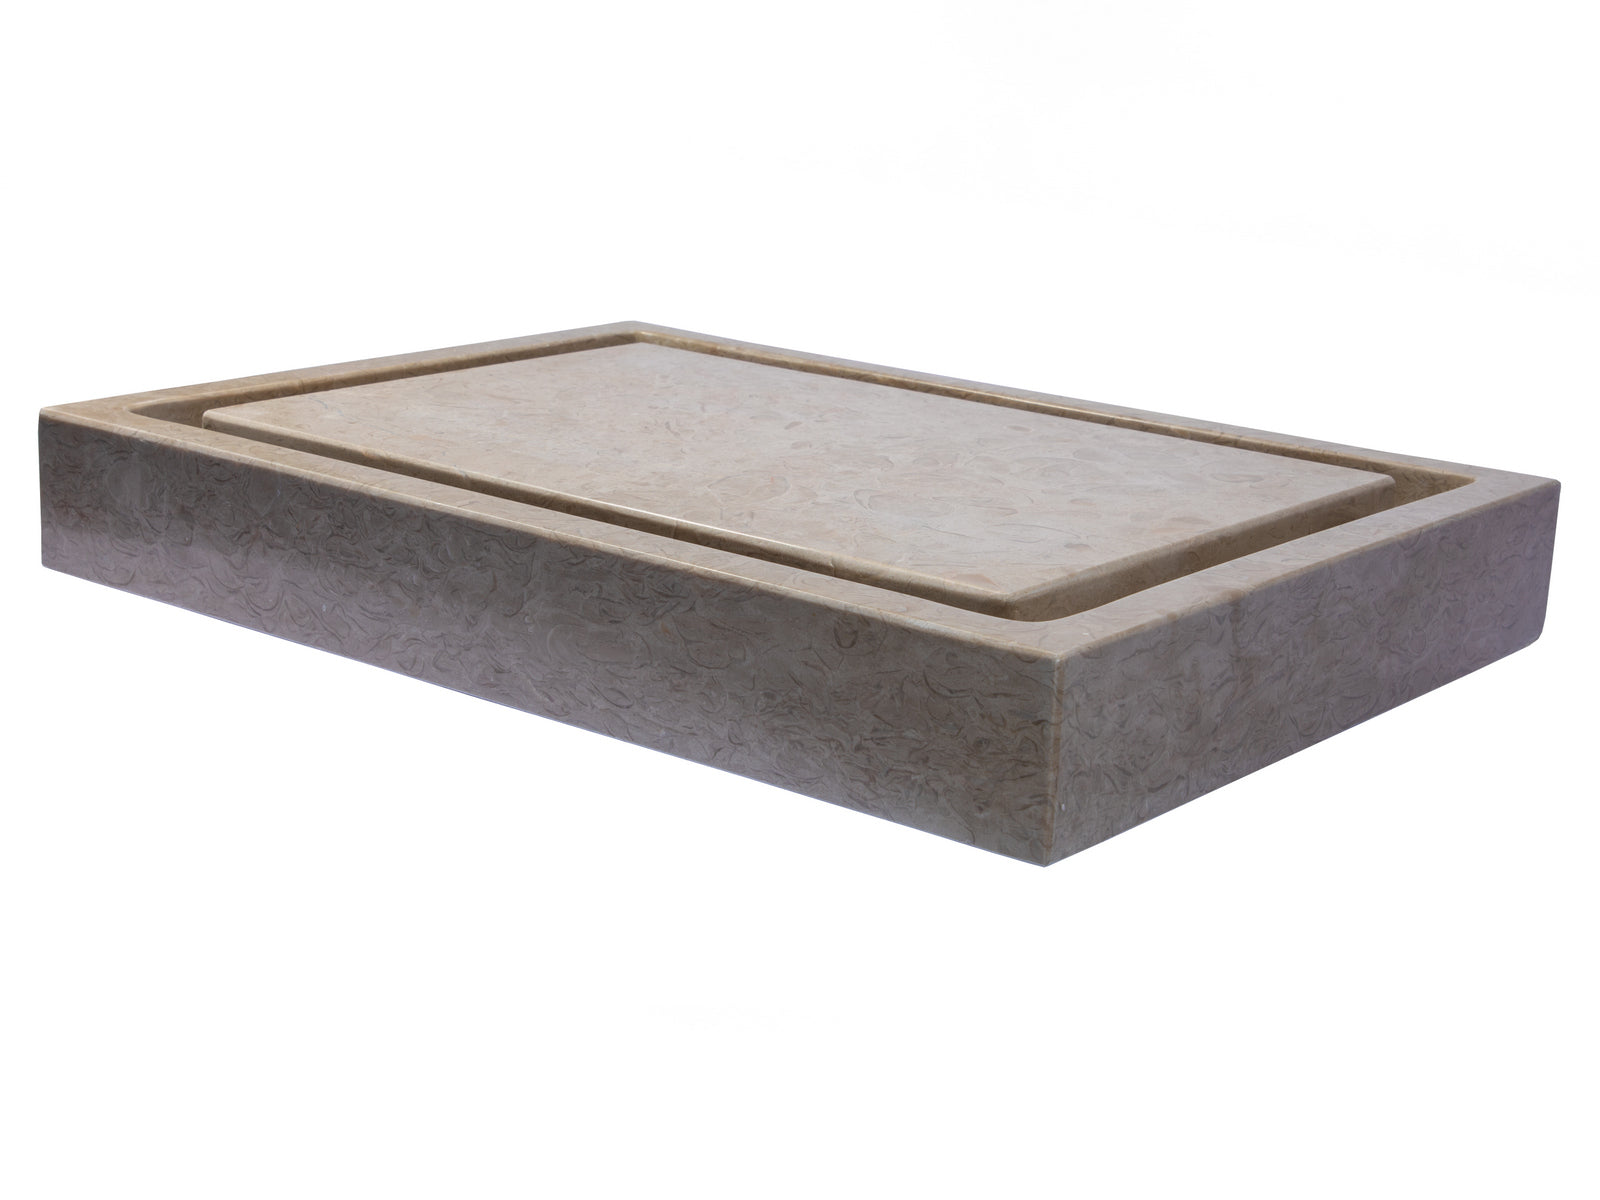 Rectangular Infinity Pool Sink in Polished Penny Grey Marble